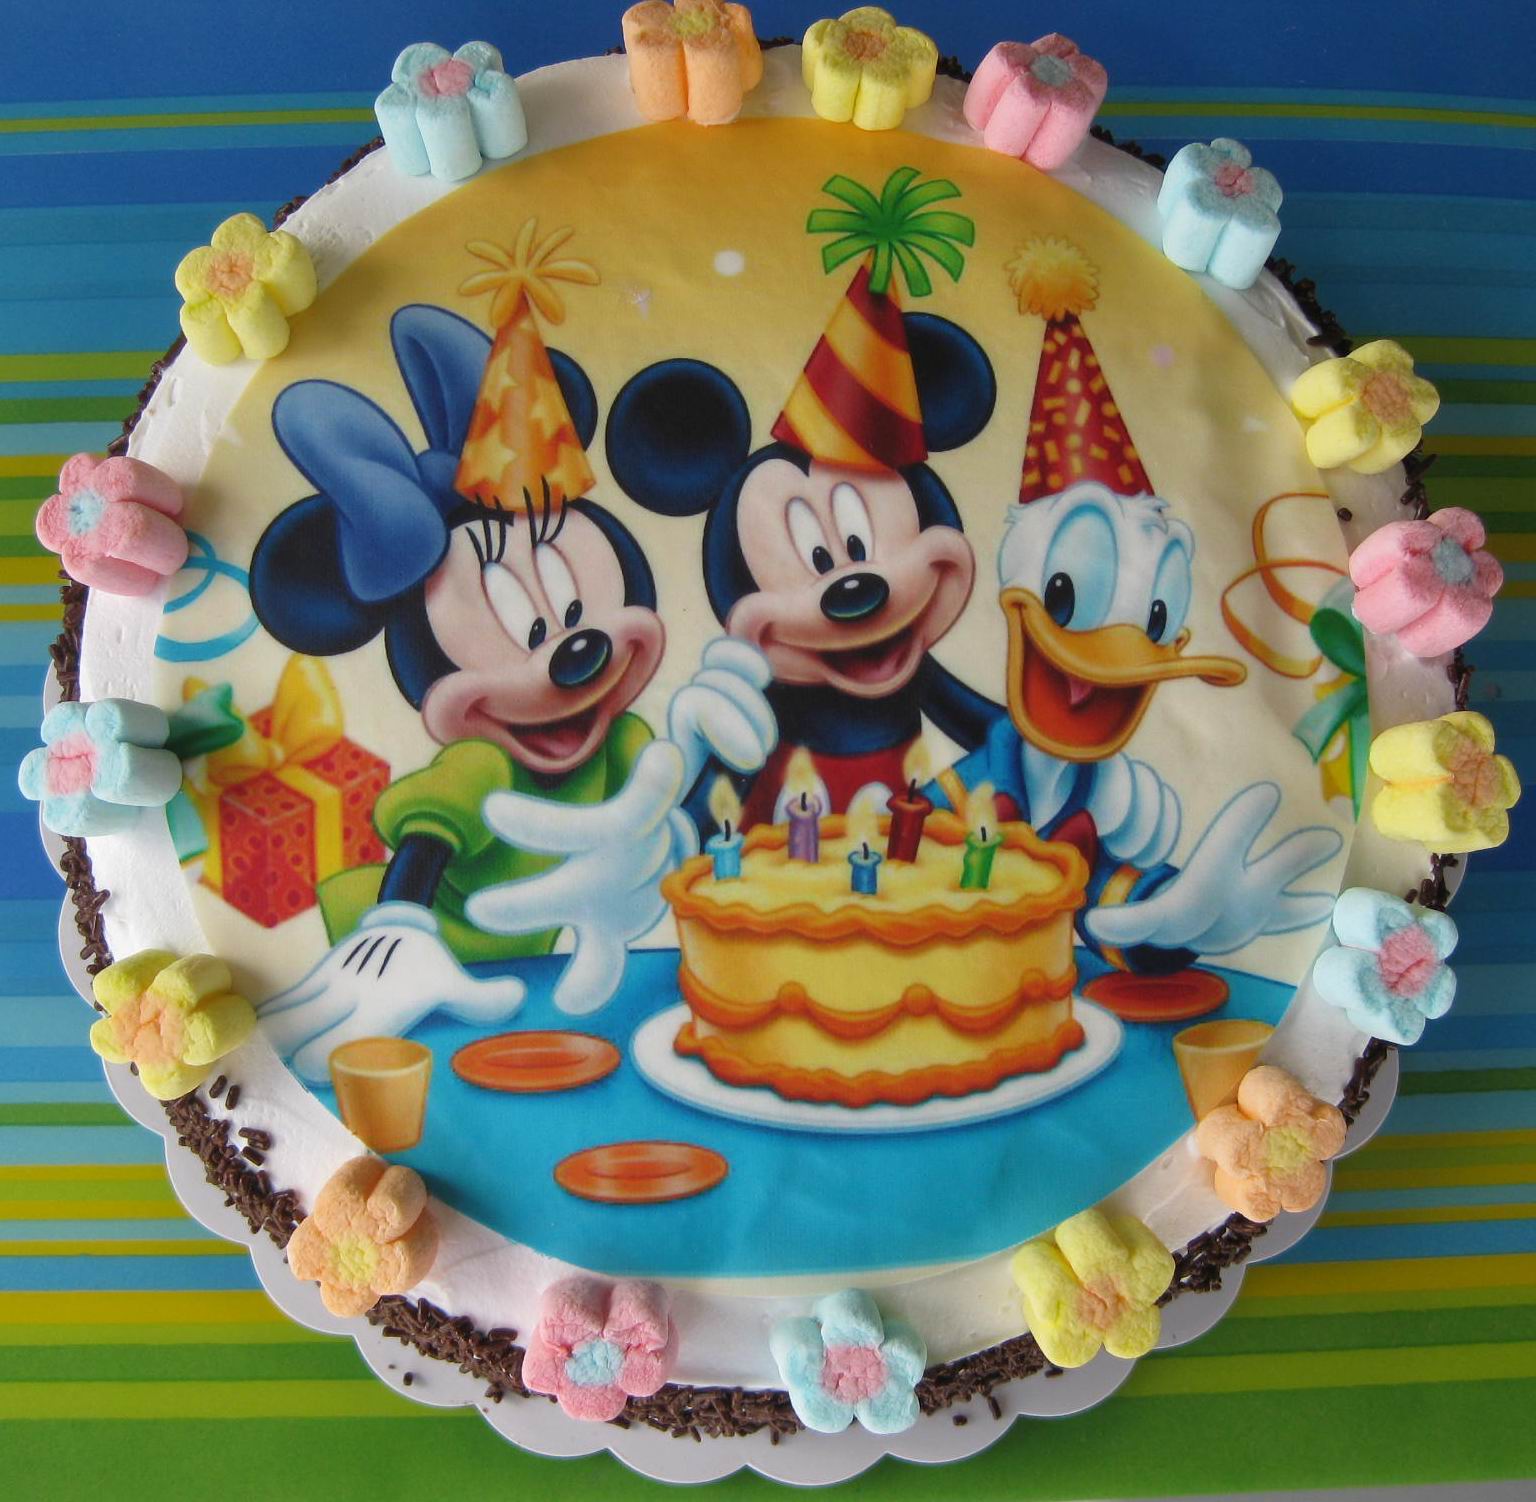 Connie's Home Sweets: 產品編號: A2862 Mickey mouse cake米奇老鼠生日蛋糕birthday ...